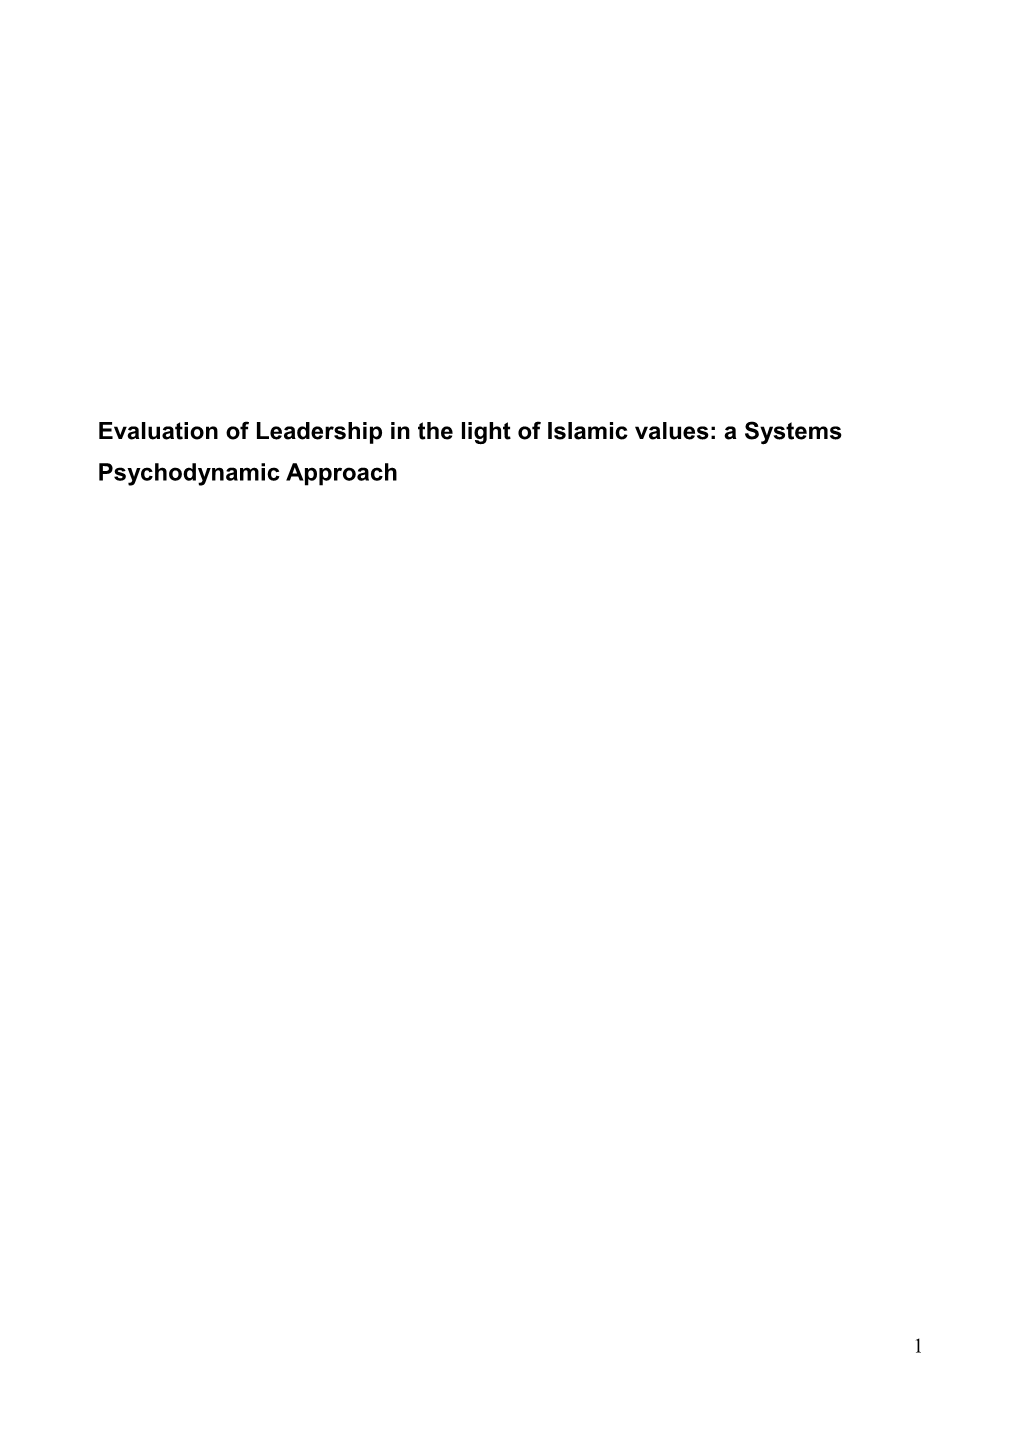 Evaluation of Leadership in the Light of Islamic Values: a Systems Psychodynamic Approach